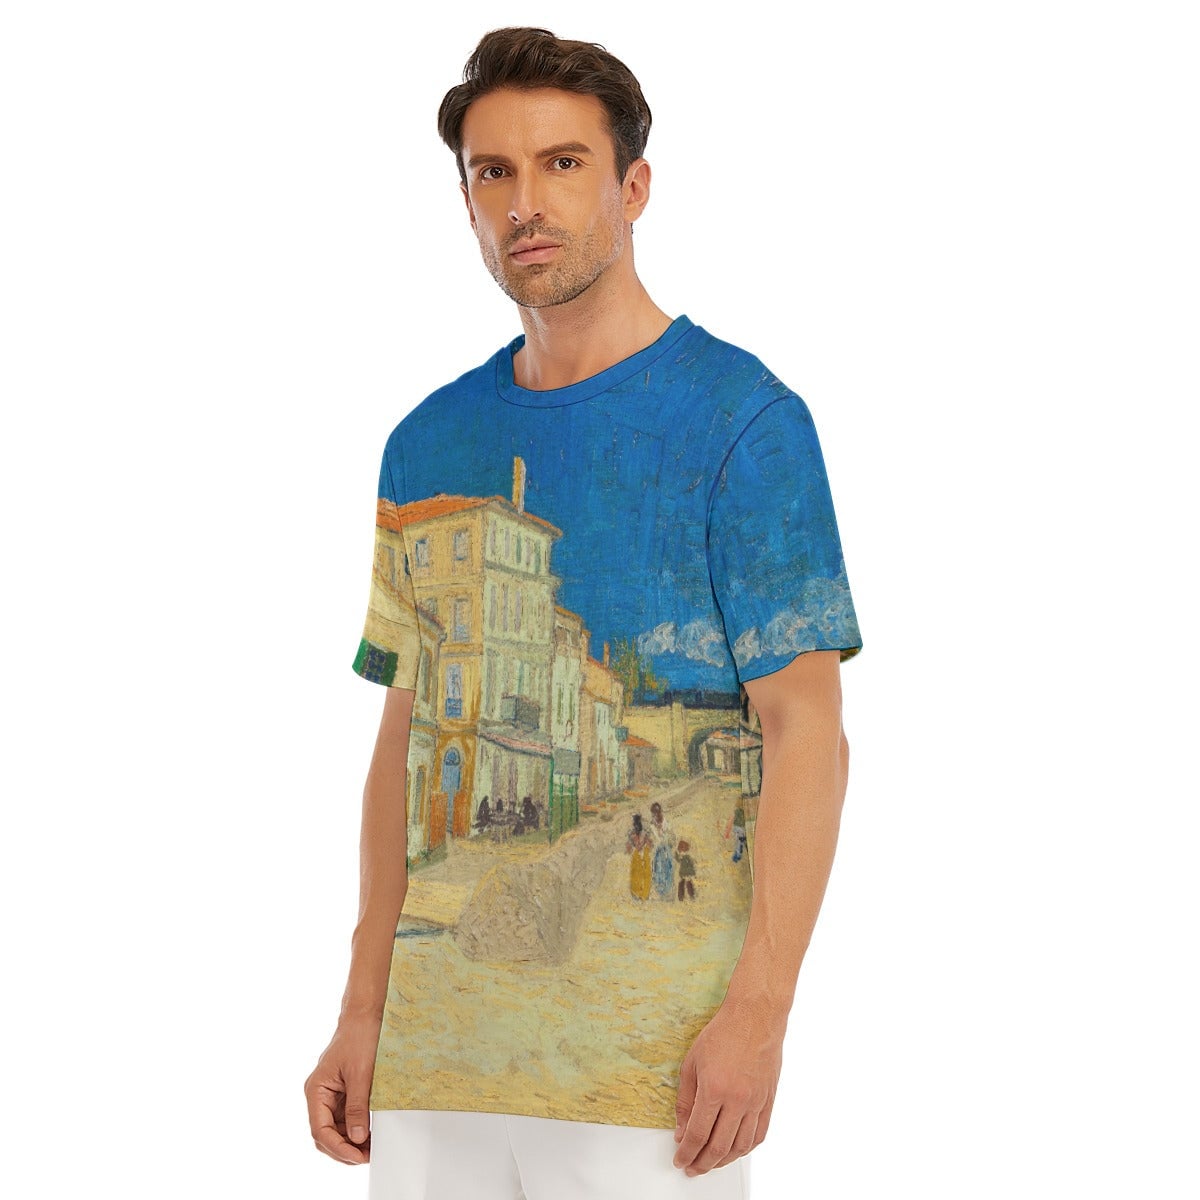 Vincent van Gogh’s The Yellow House T-Shirt